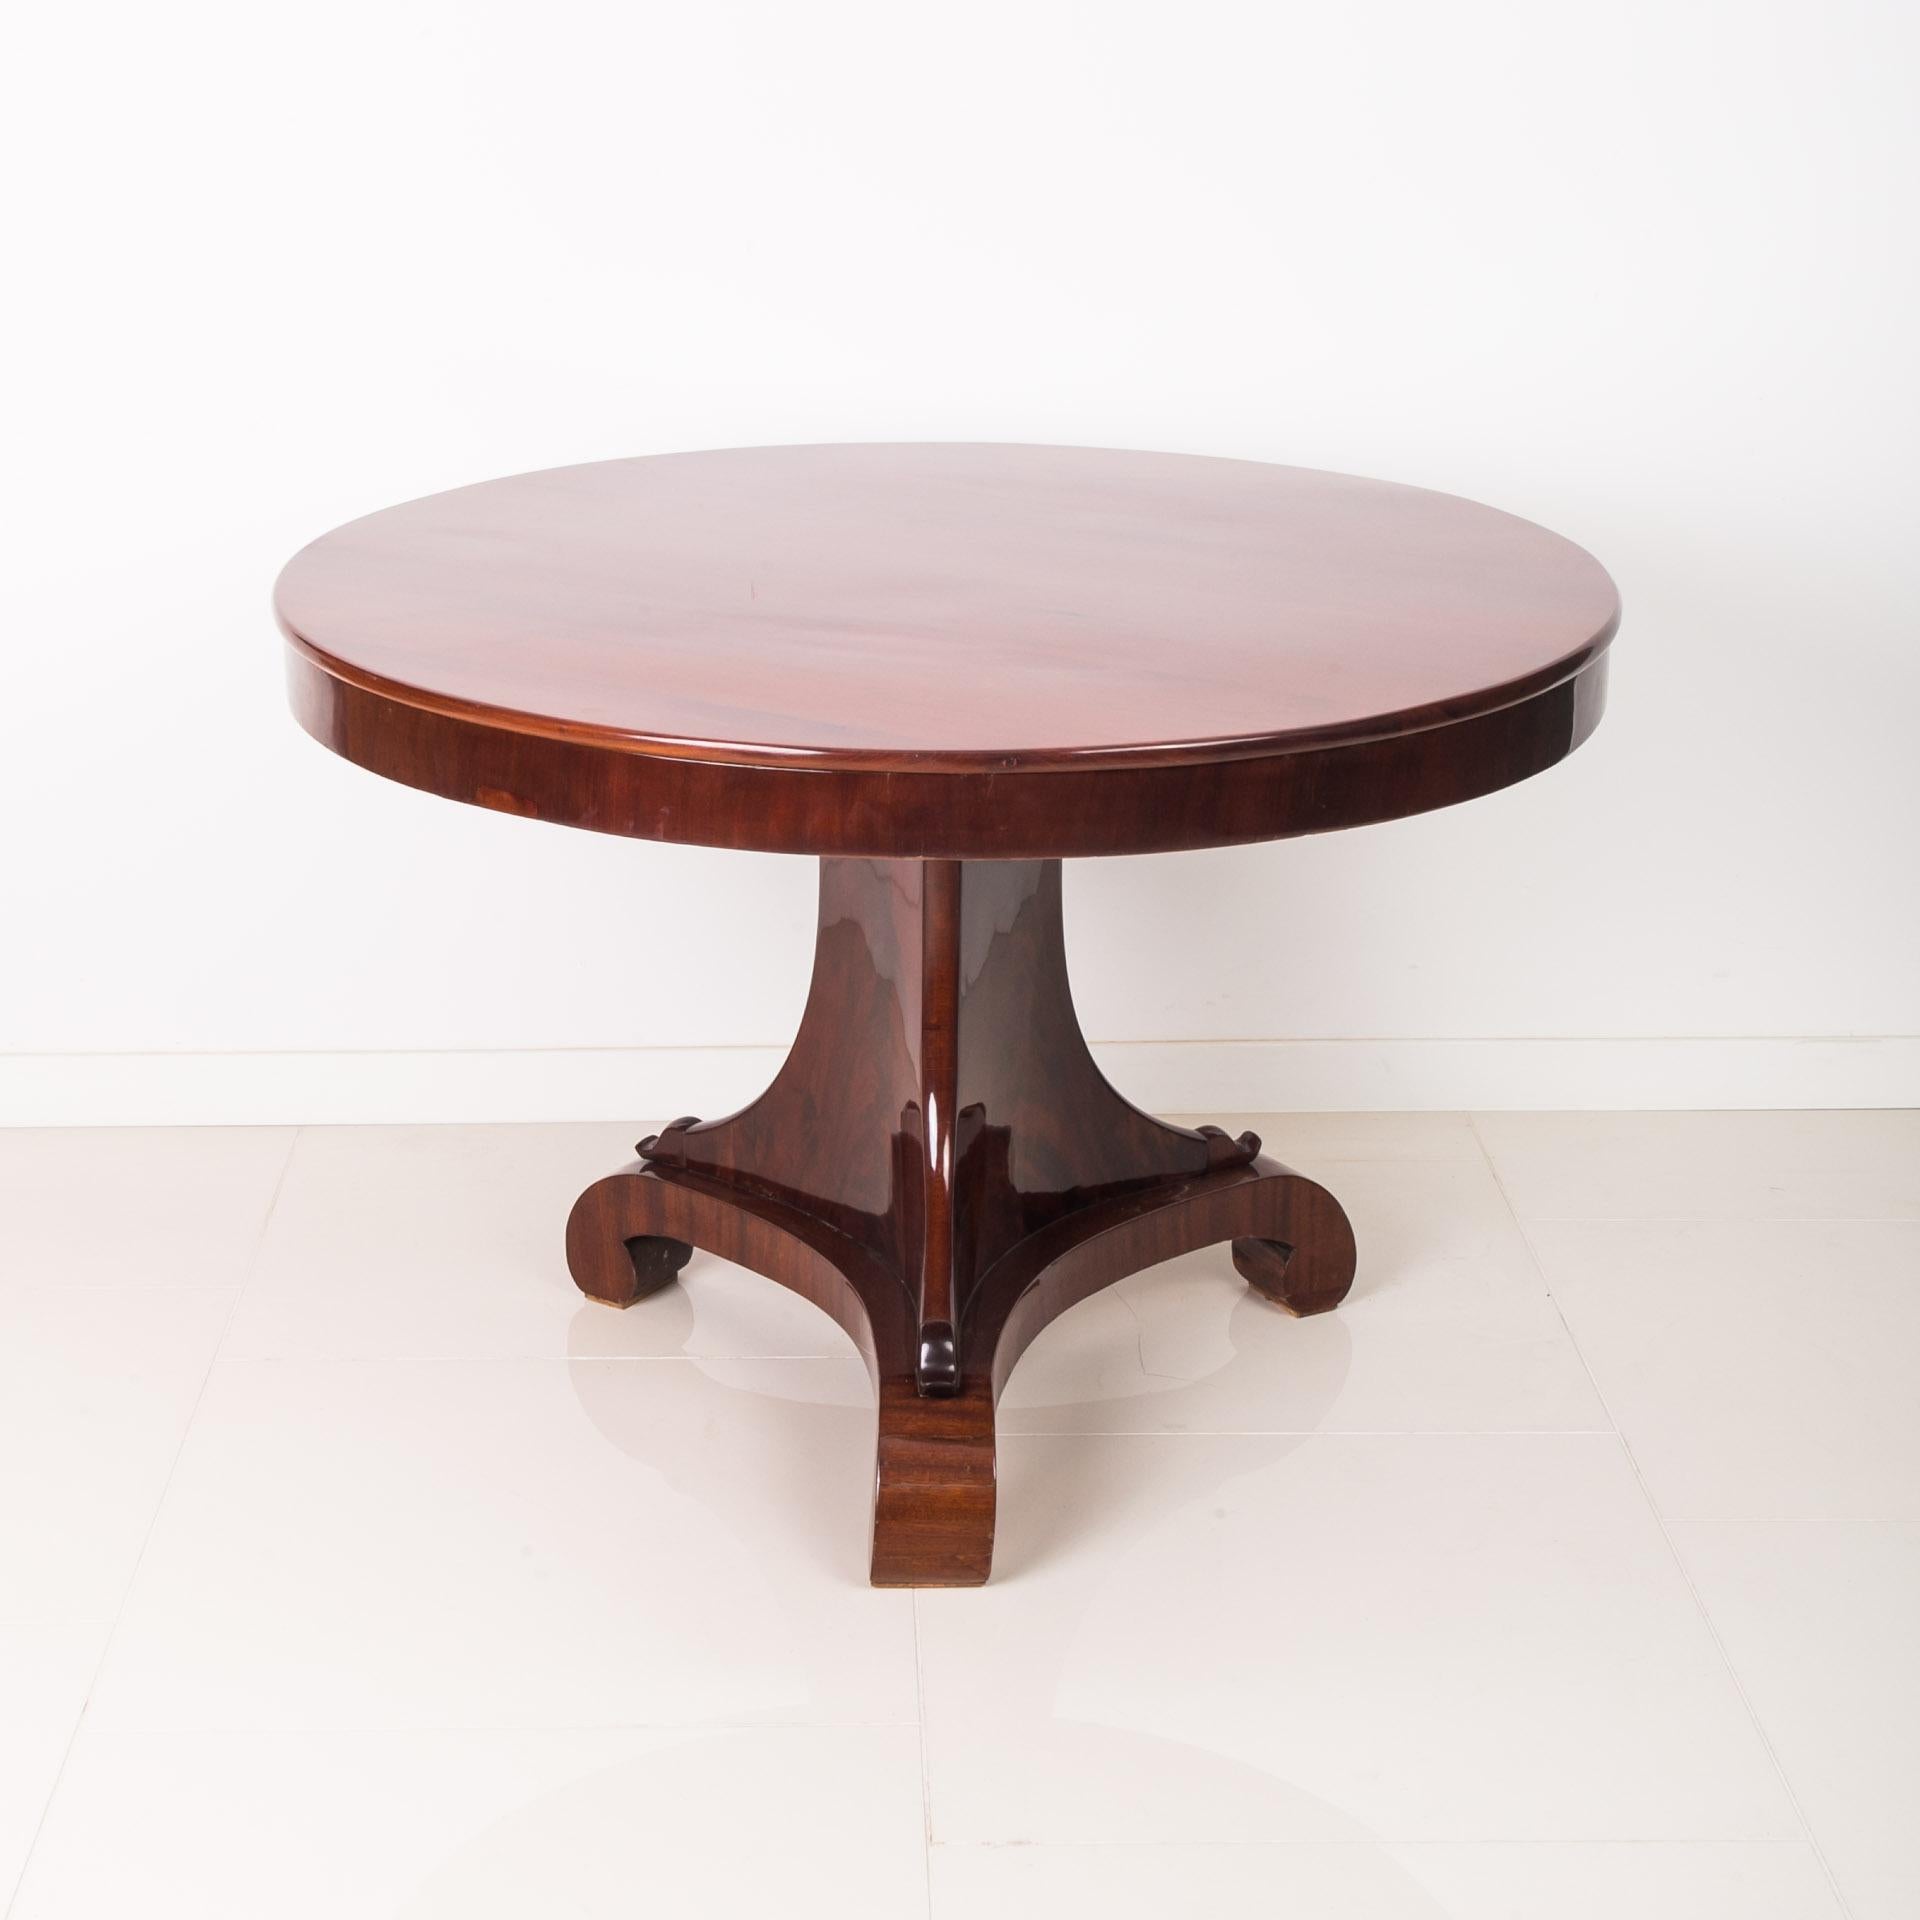 This Biedermeier round table was made around 1820 - 1840. It is supported on a trilateral shaft with rounded corners extending downwards, placed on a triangular platform. The piece is made of coniferous wood and veneered with pyramidal mahogany, the